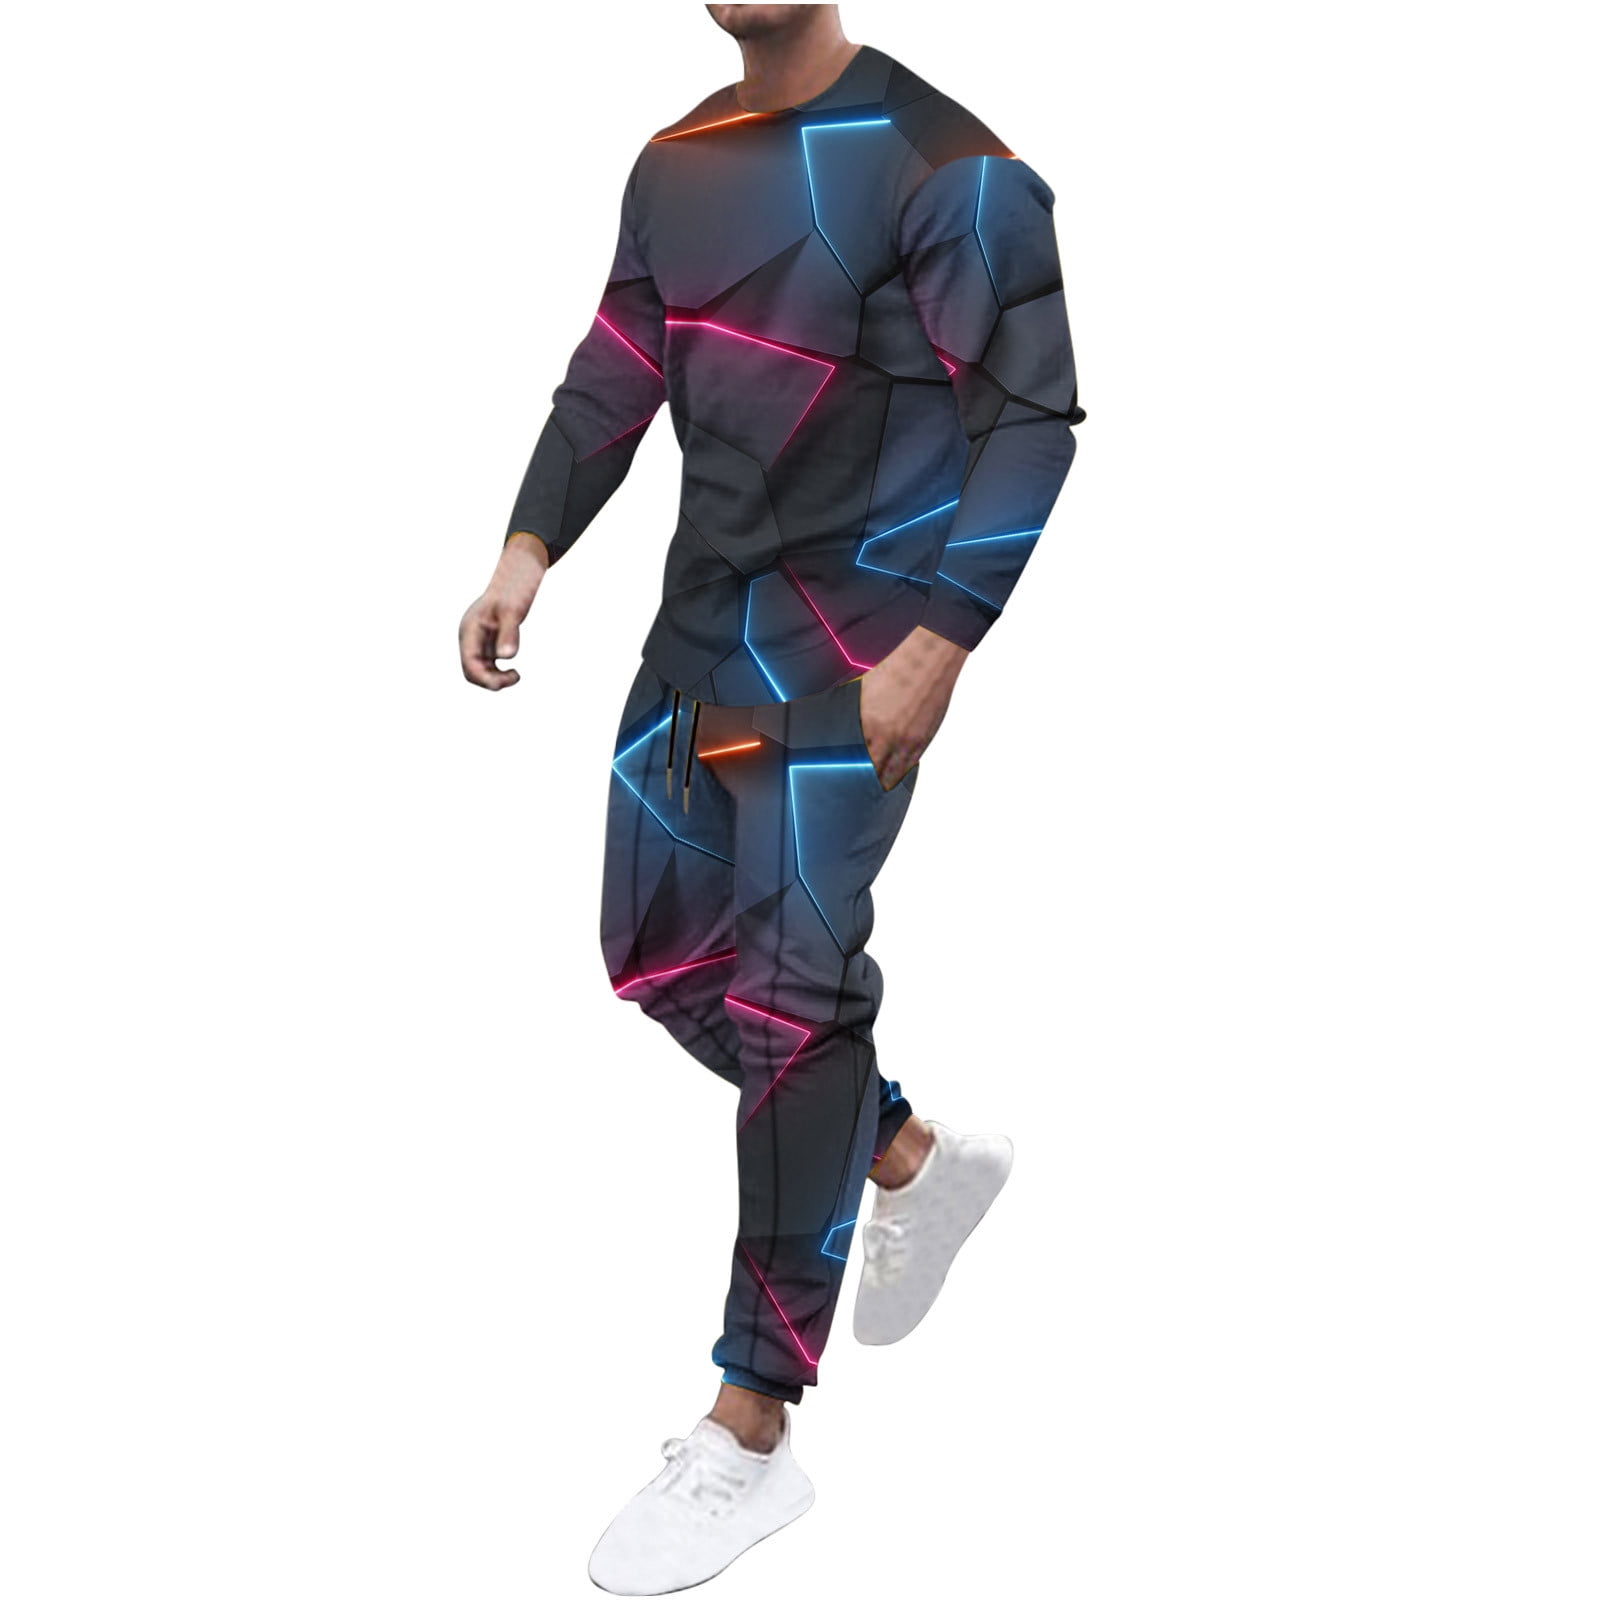 Amtdh Men's 2 Piece Sweatsuits Clearance Geometric Print Lightweight Casual  Outfit Set Long Sleeve T-shirt Jogging Sweatpant Set Soft Graphic